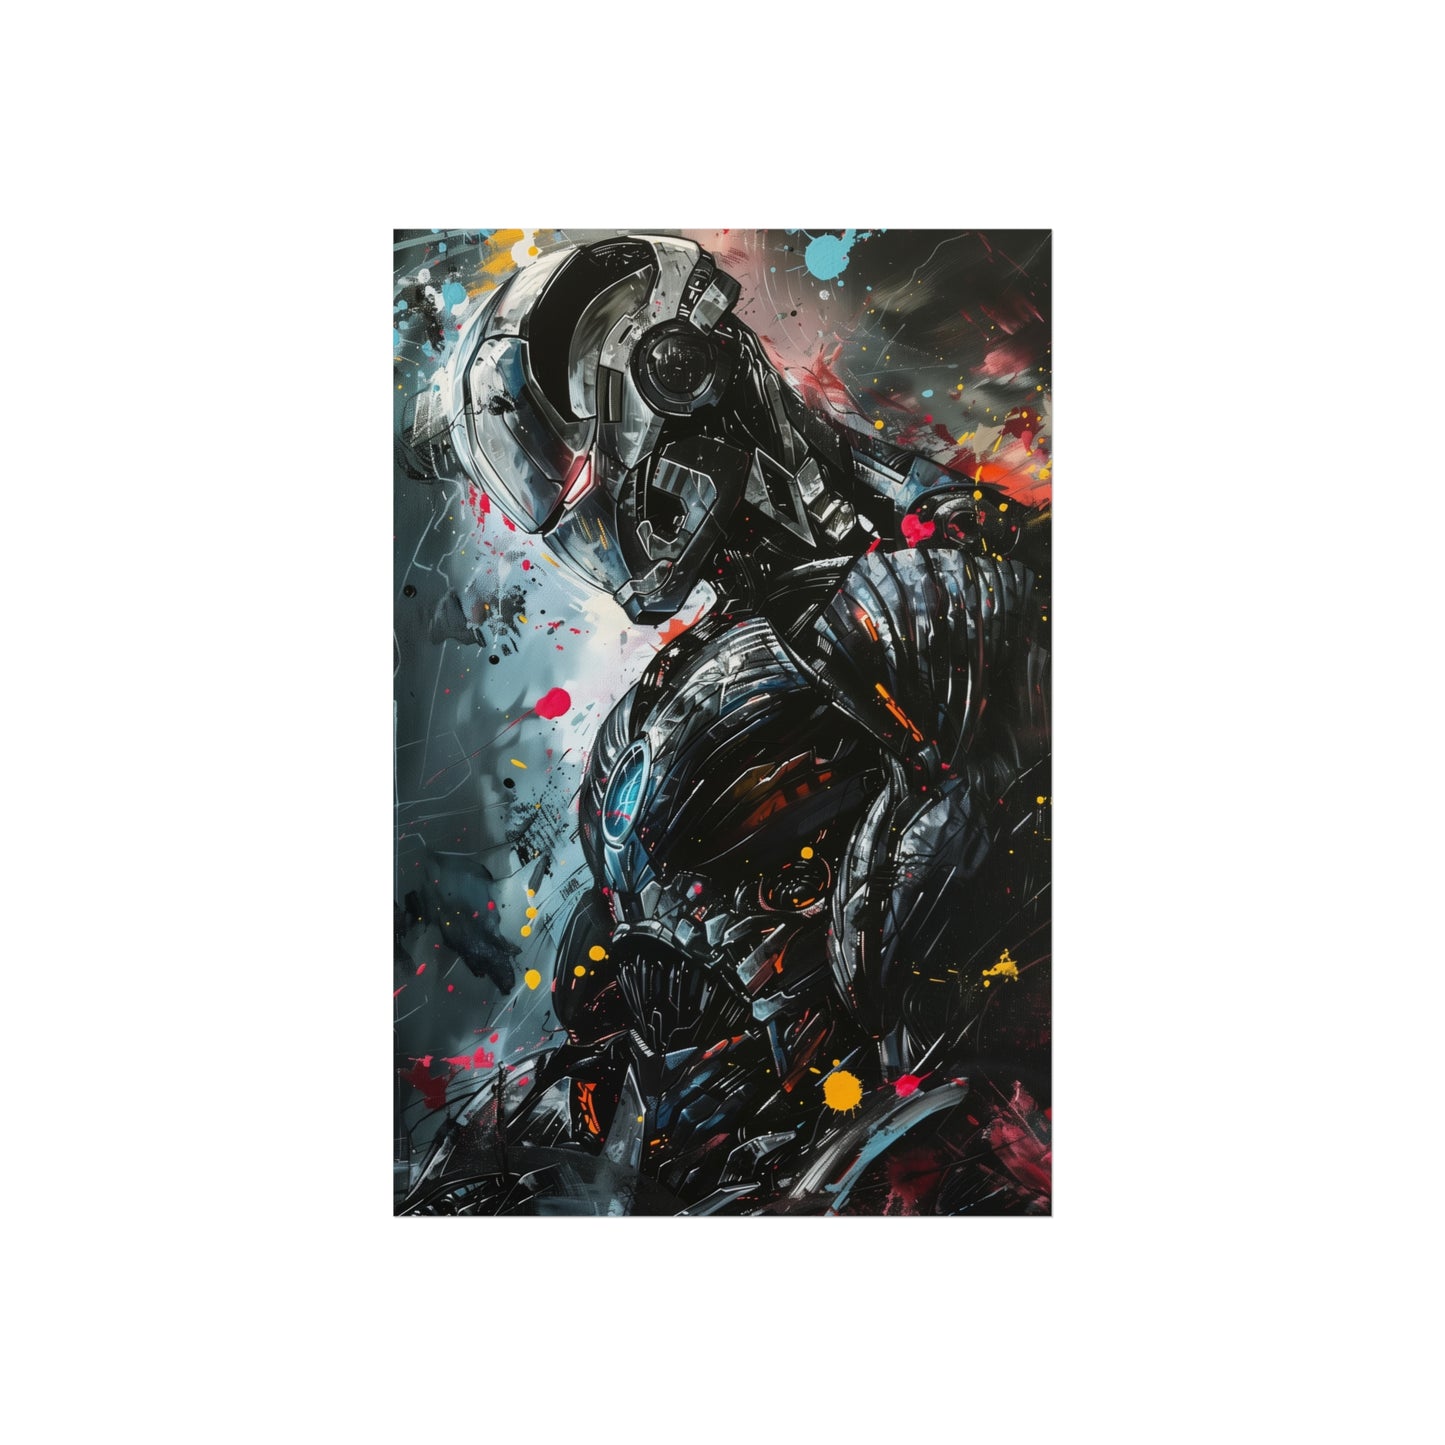 Ultron Poster